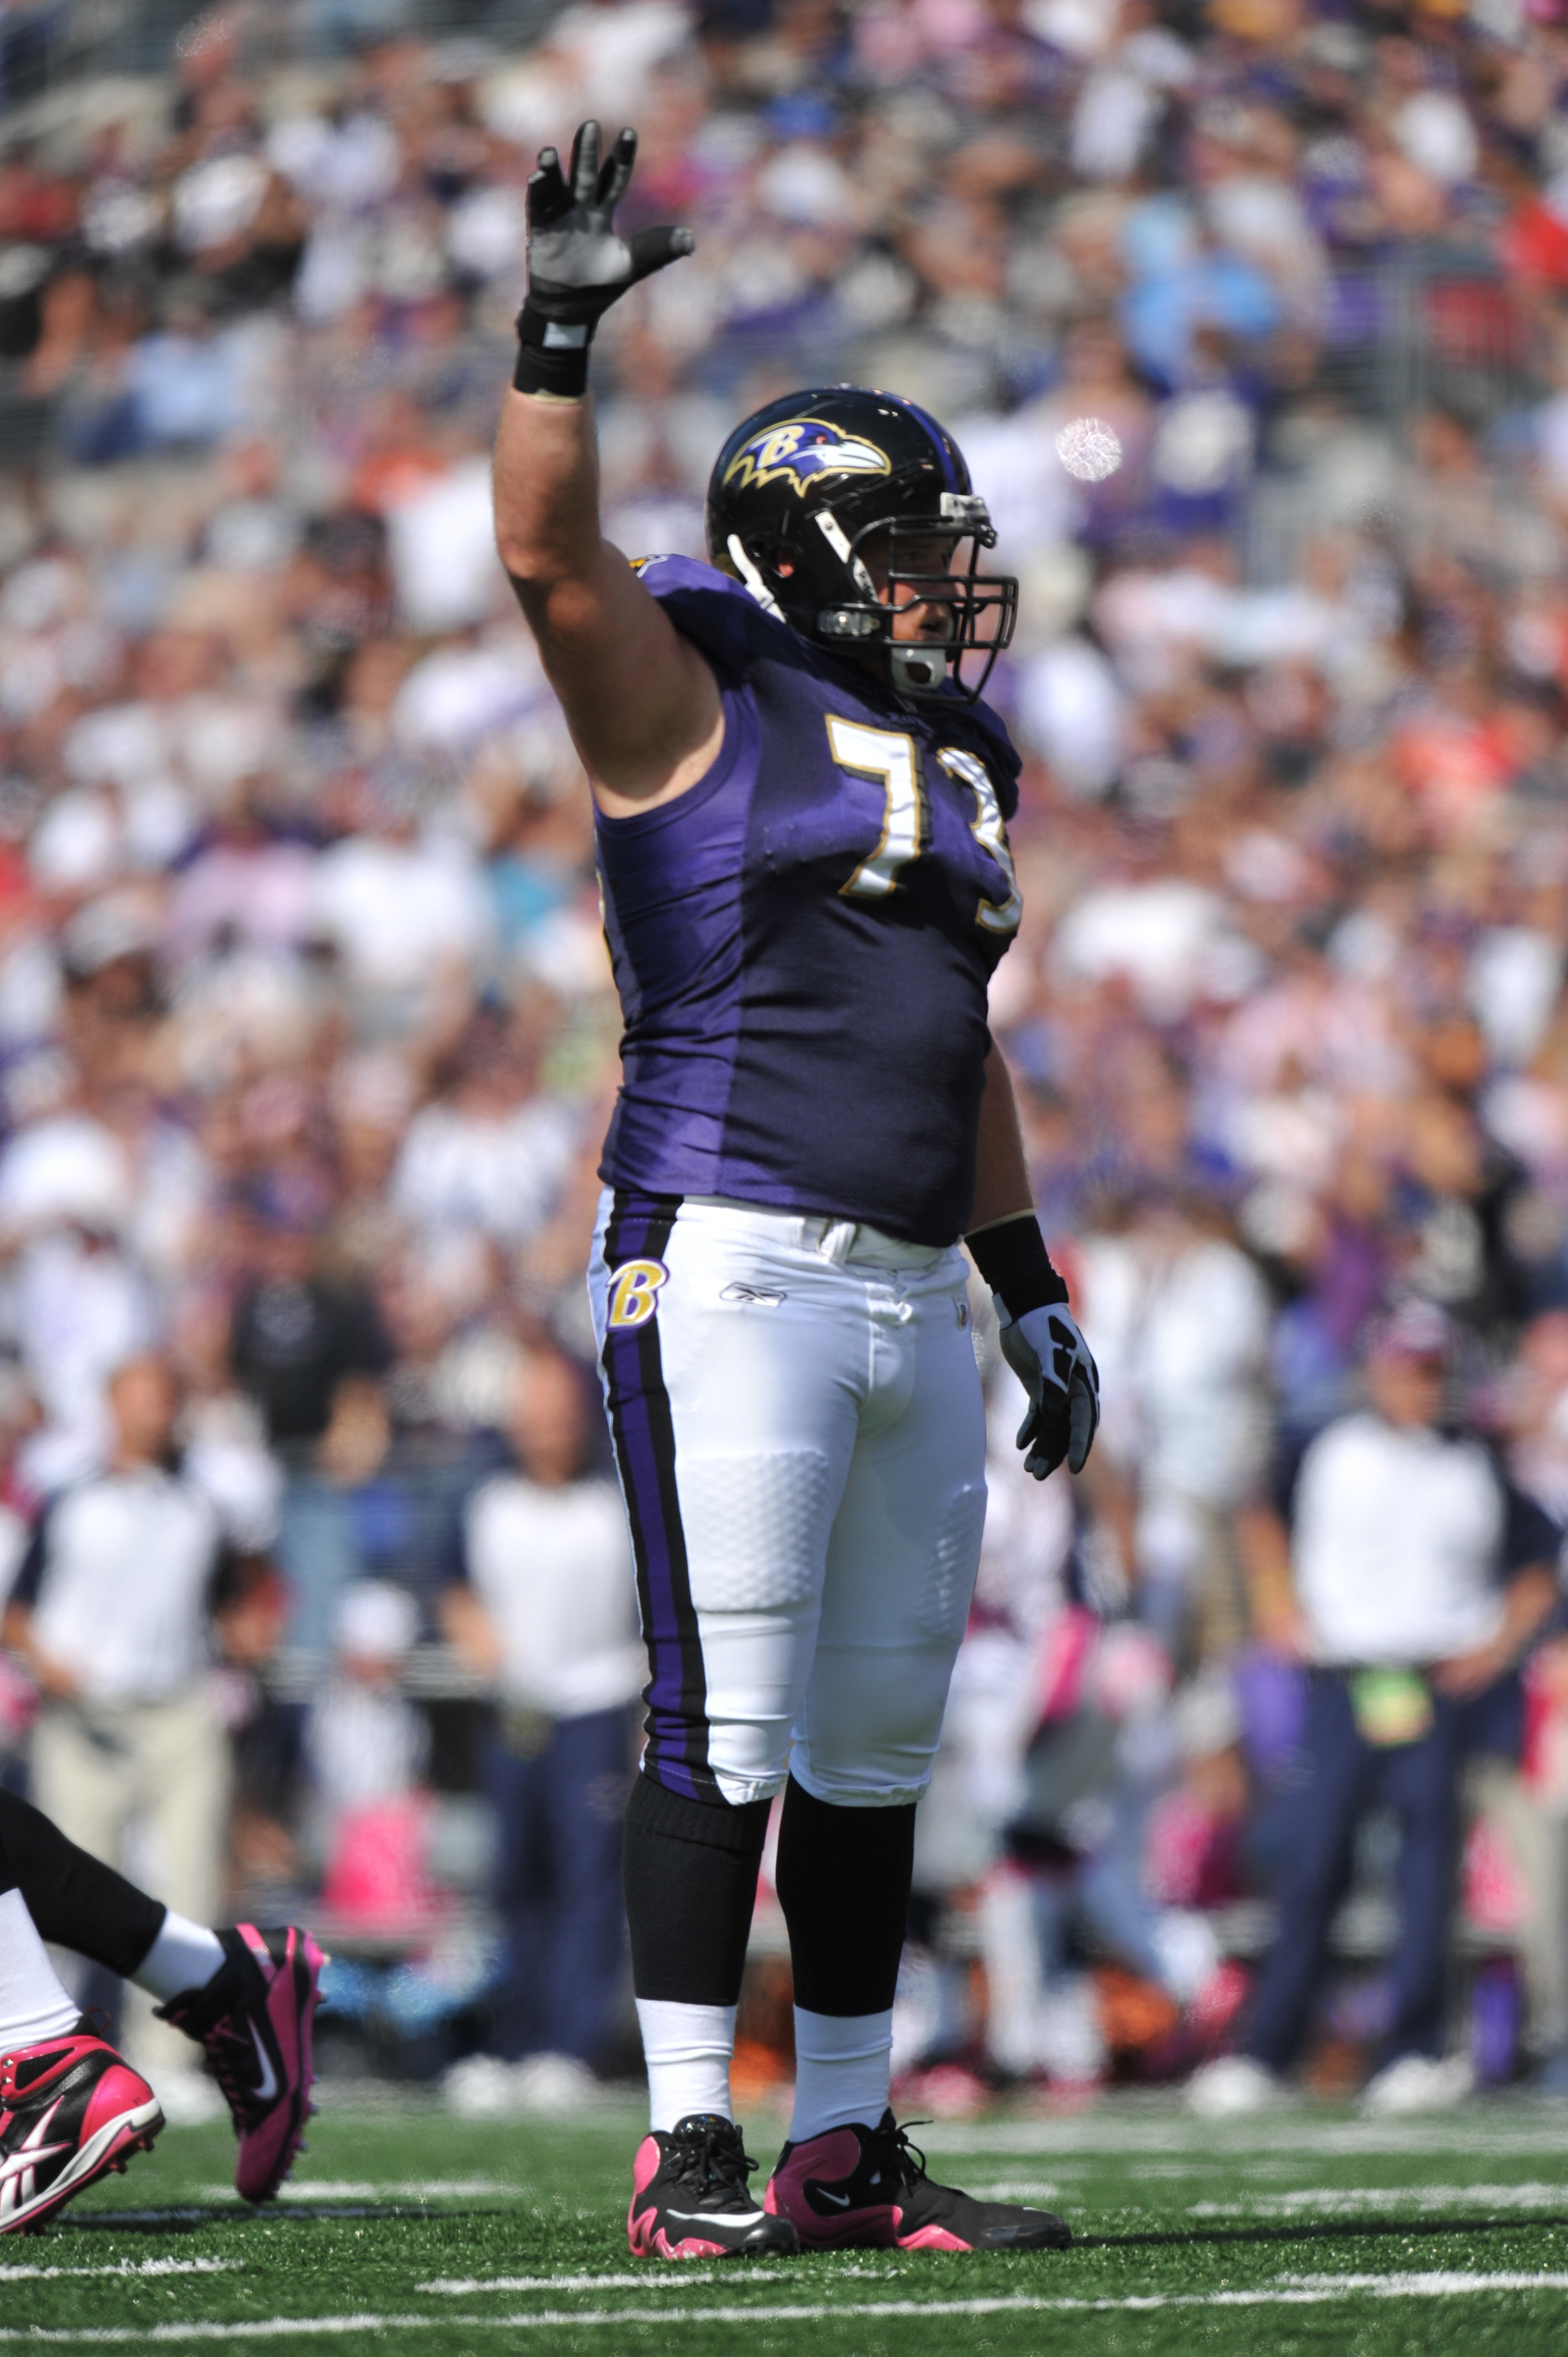 BALTIMORE, MD - OCTOBER 10: Marshal Yanda #73 of the Baltimore Ravens waves to the crowd during the game against the Denver Broncos at M&T Bank Stadium on October 10, 2010 in Baltimore, Maryland. Players wore pink in recognition of Breast Cancer Awareness